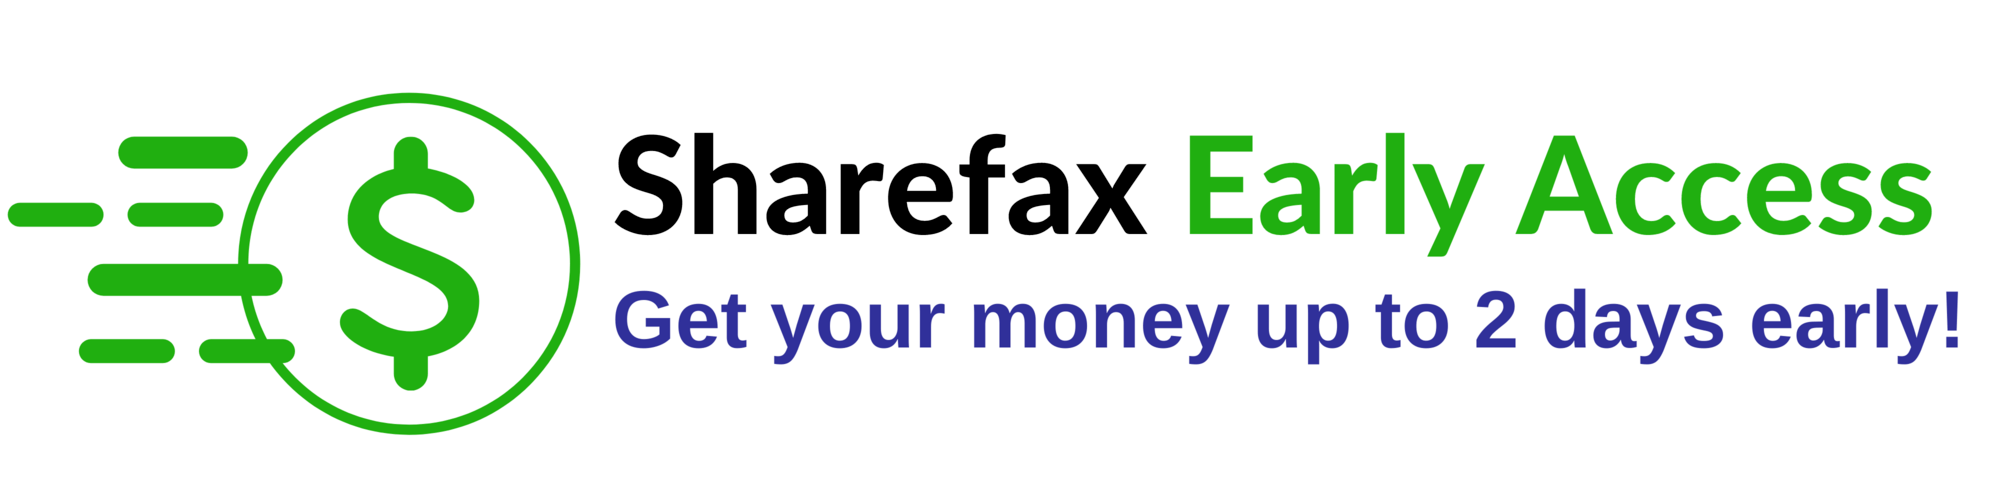 Sharefax Early Access